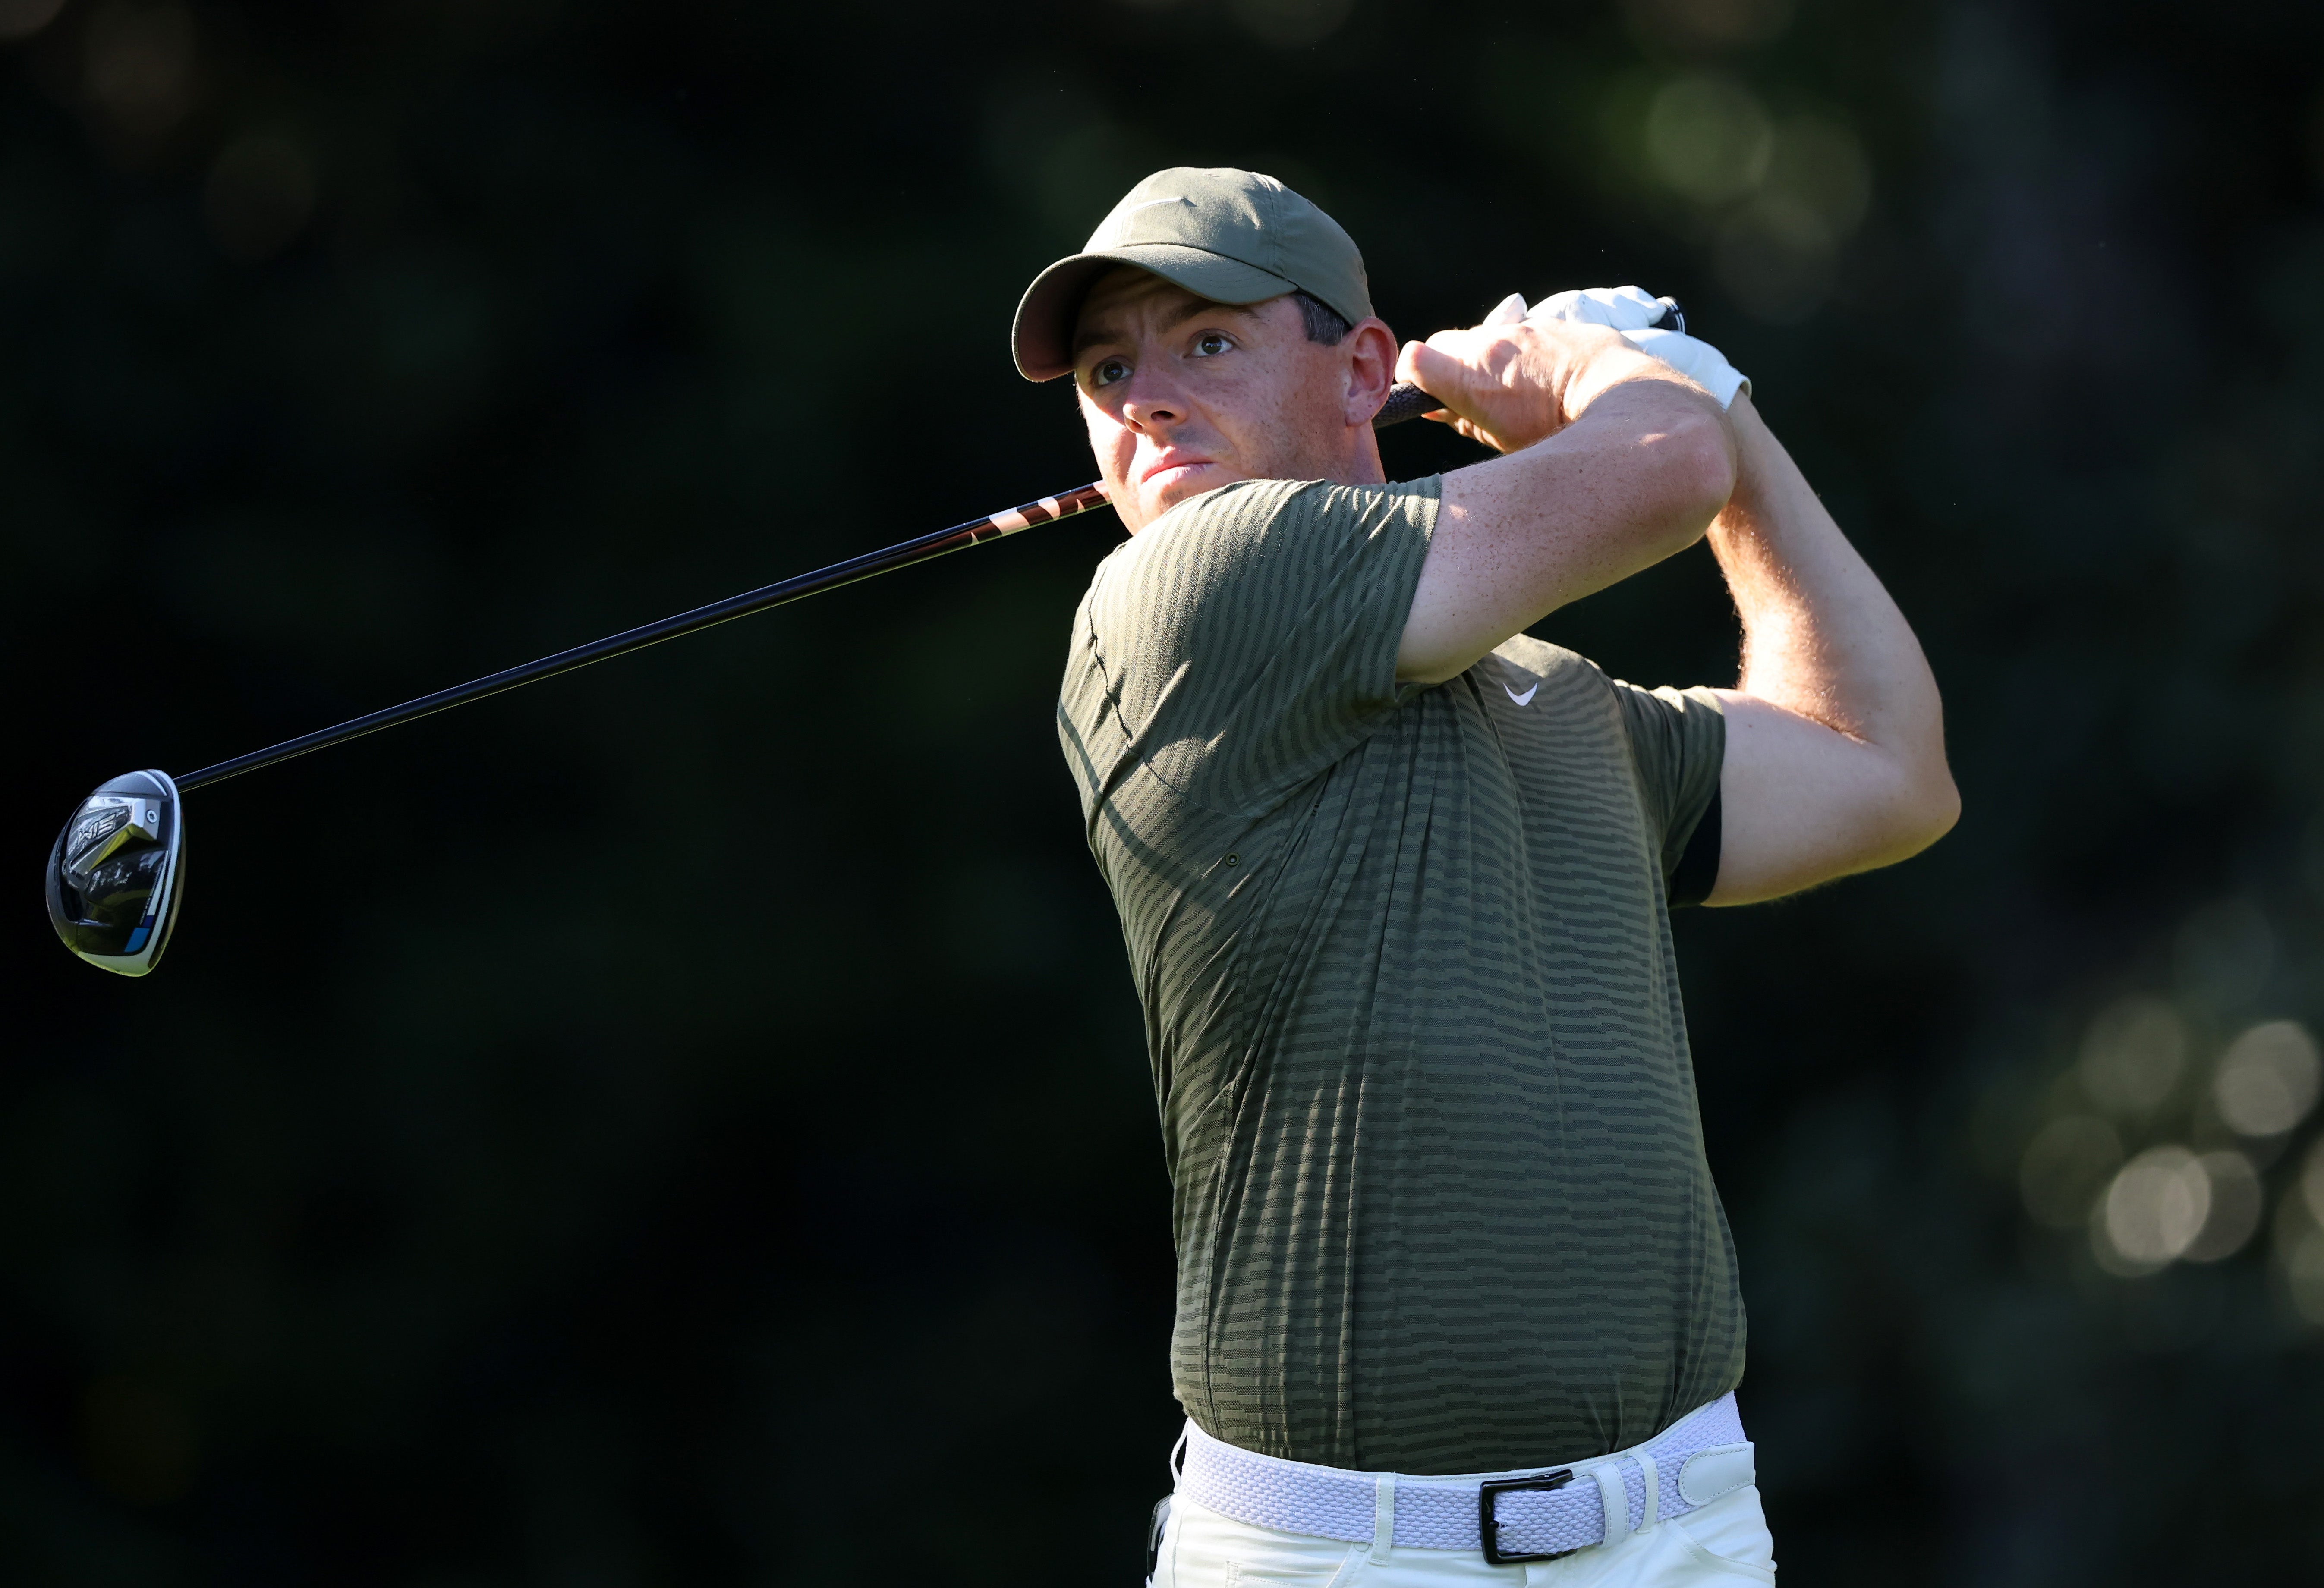 Rory McIlroy recovered from a poor first round to put himself in the frame for the weekend